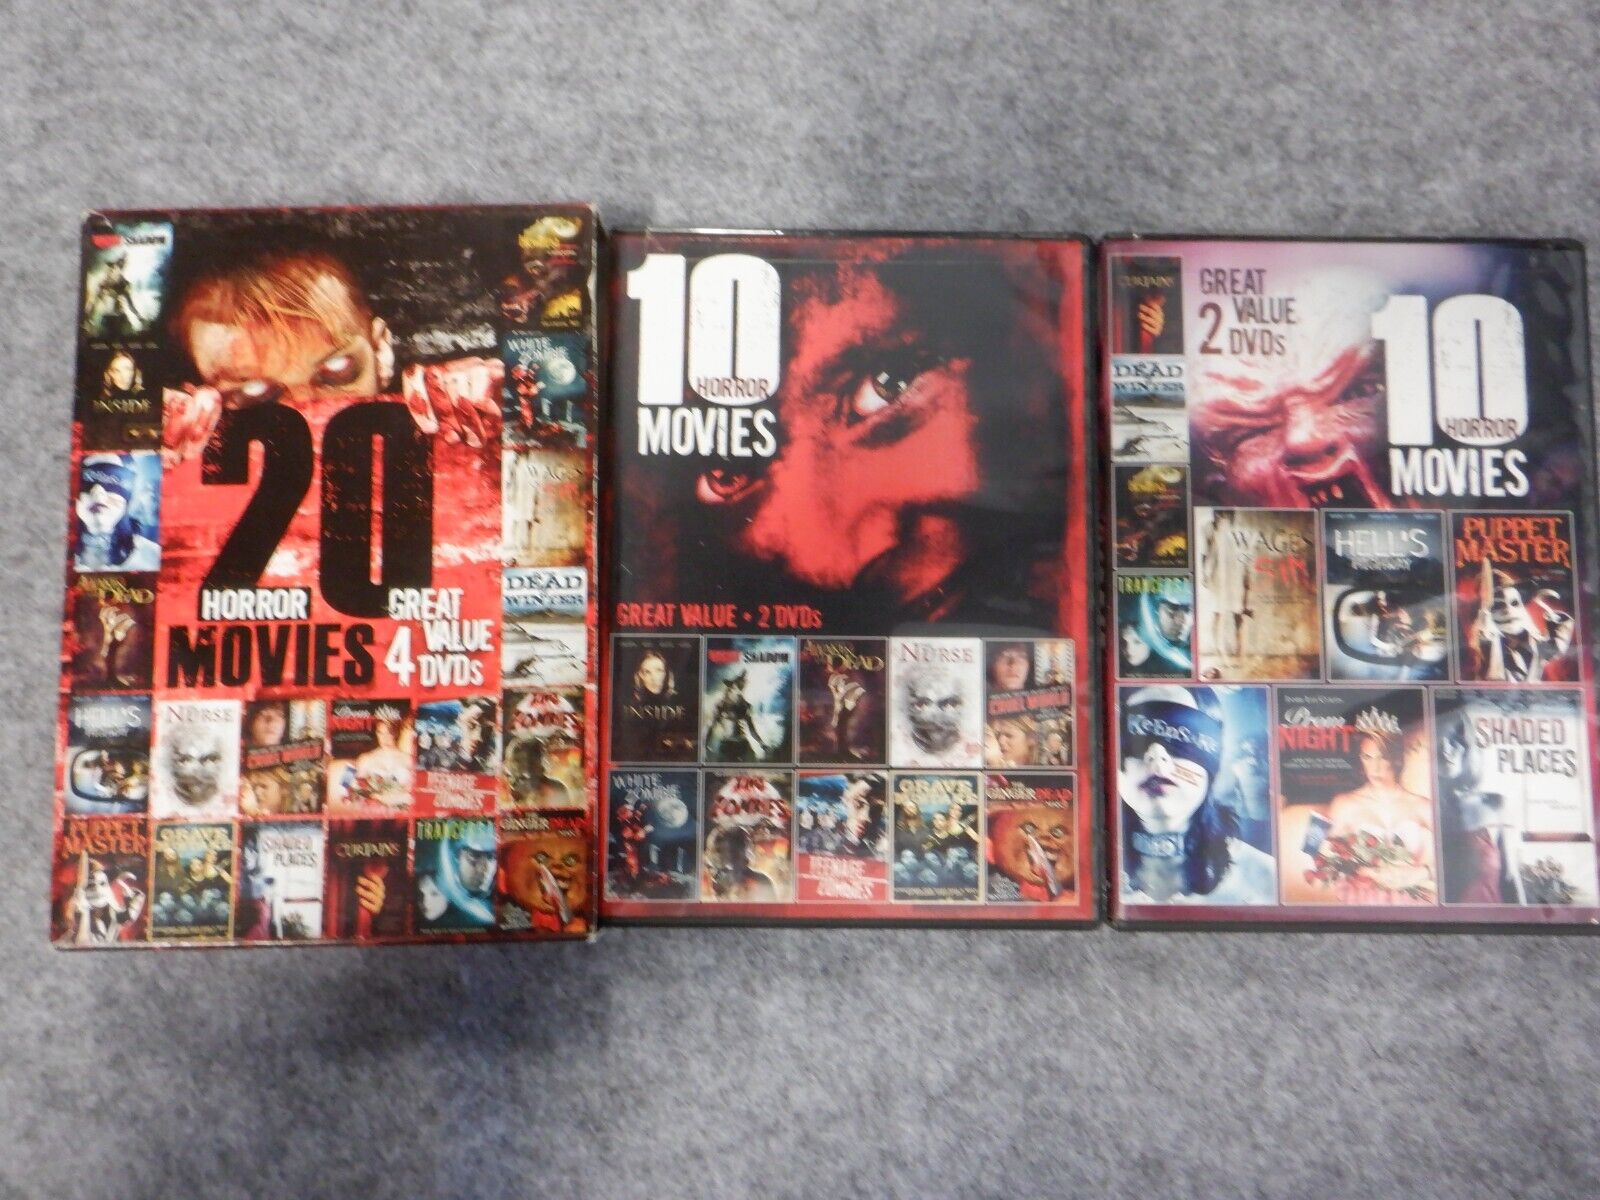 DVD - 4-Disc Set - 20 Horror Movies Collection - Great Condition | eBay